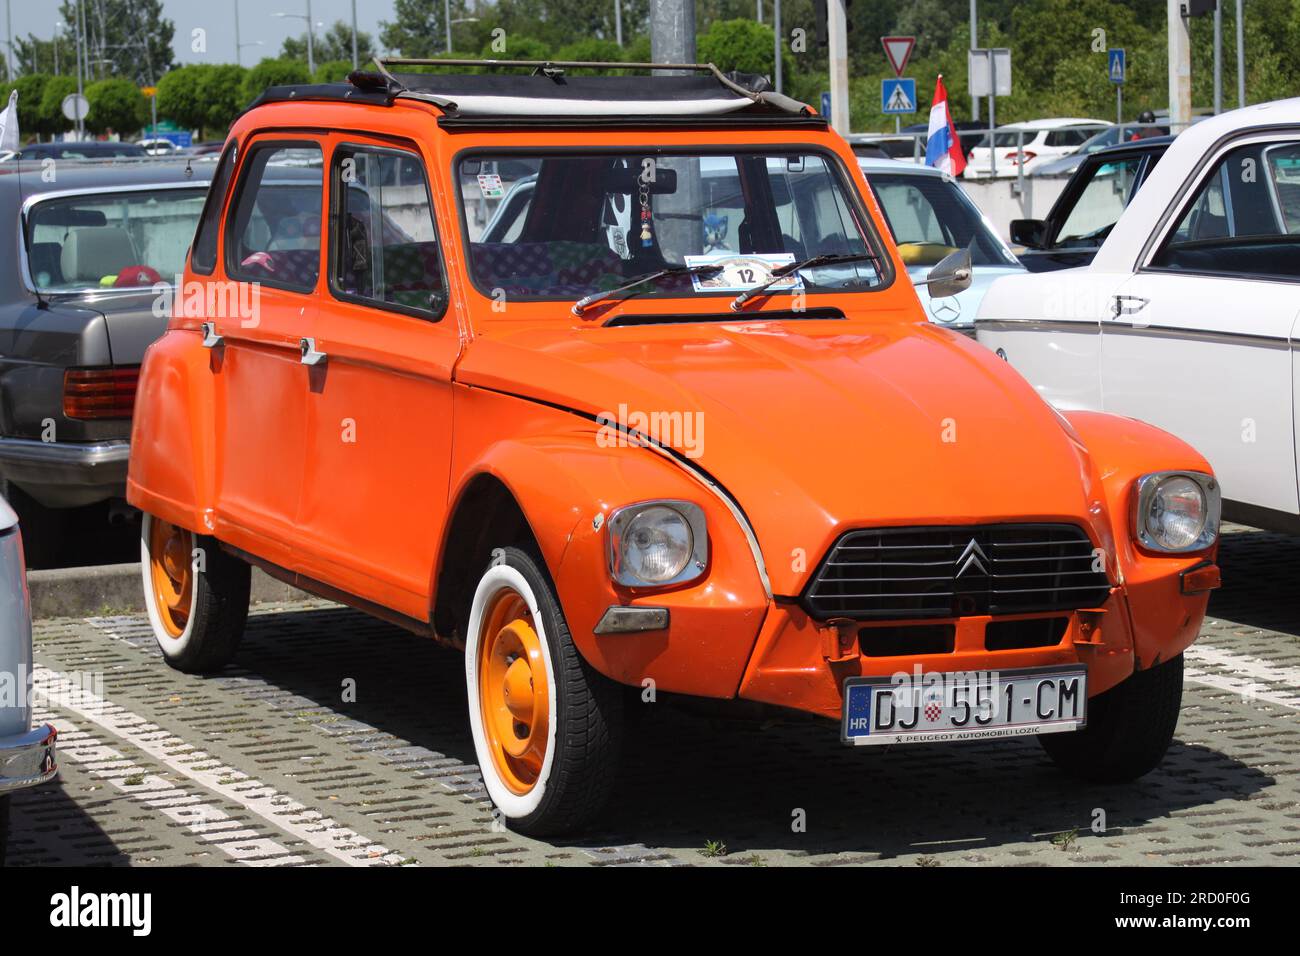 The Citroën Dyane is an economical family car produced by the French car manufacturer Citroën from 1967 to 1983. Osijek, July 7, 2023 Stock Photo